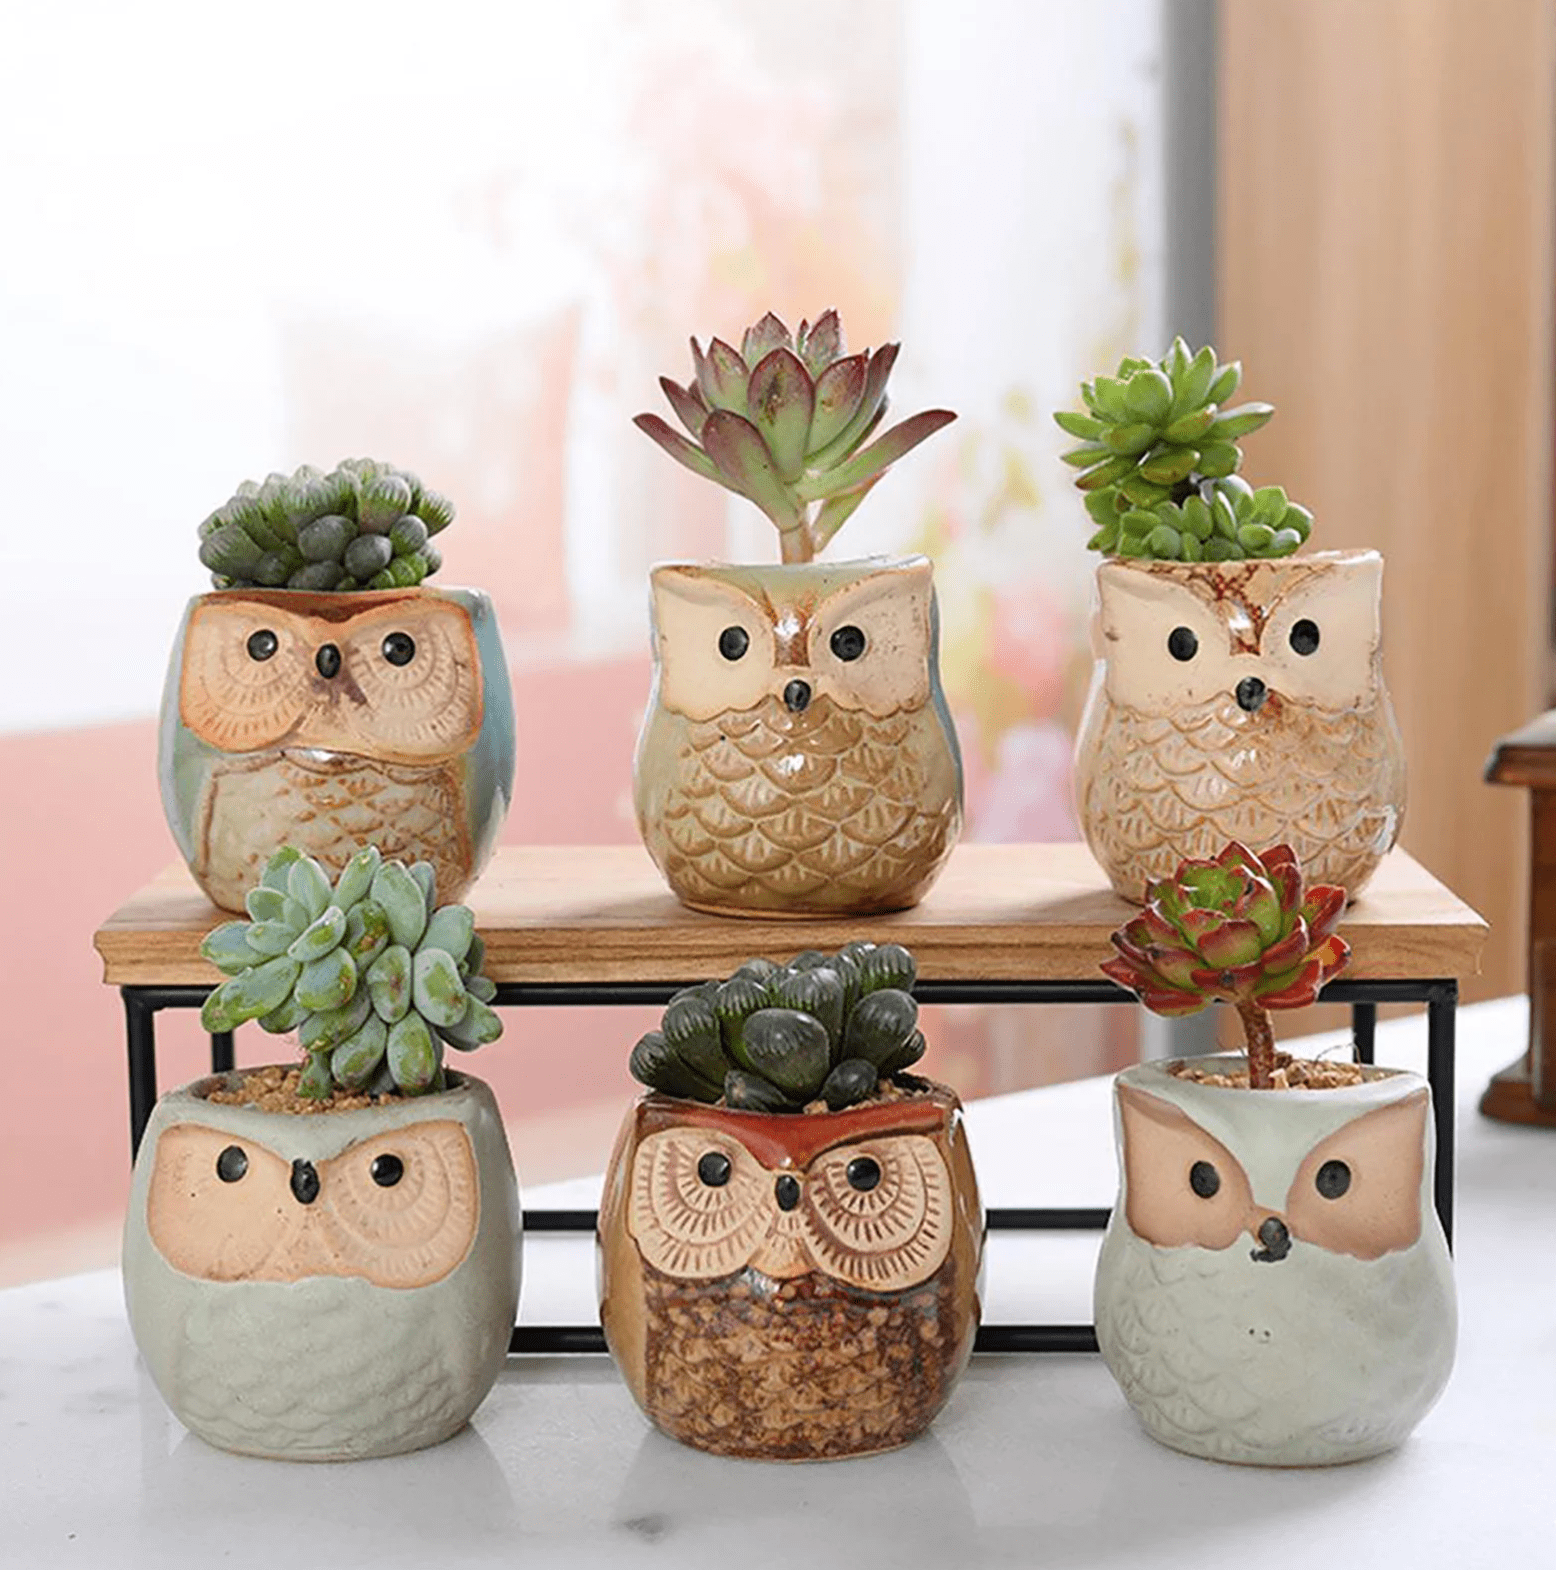 22 Unique Owl Gifts We Can't Resist